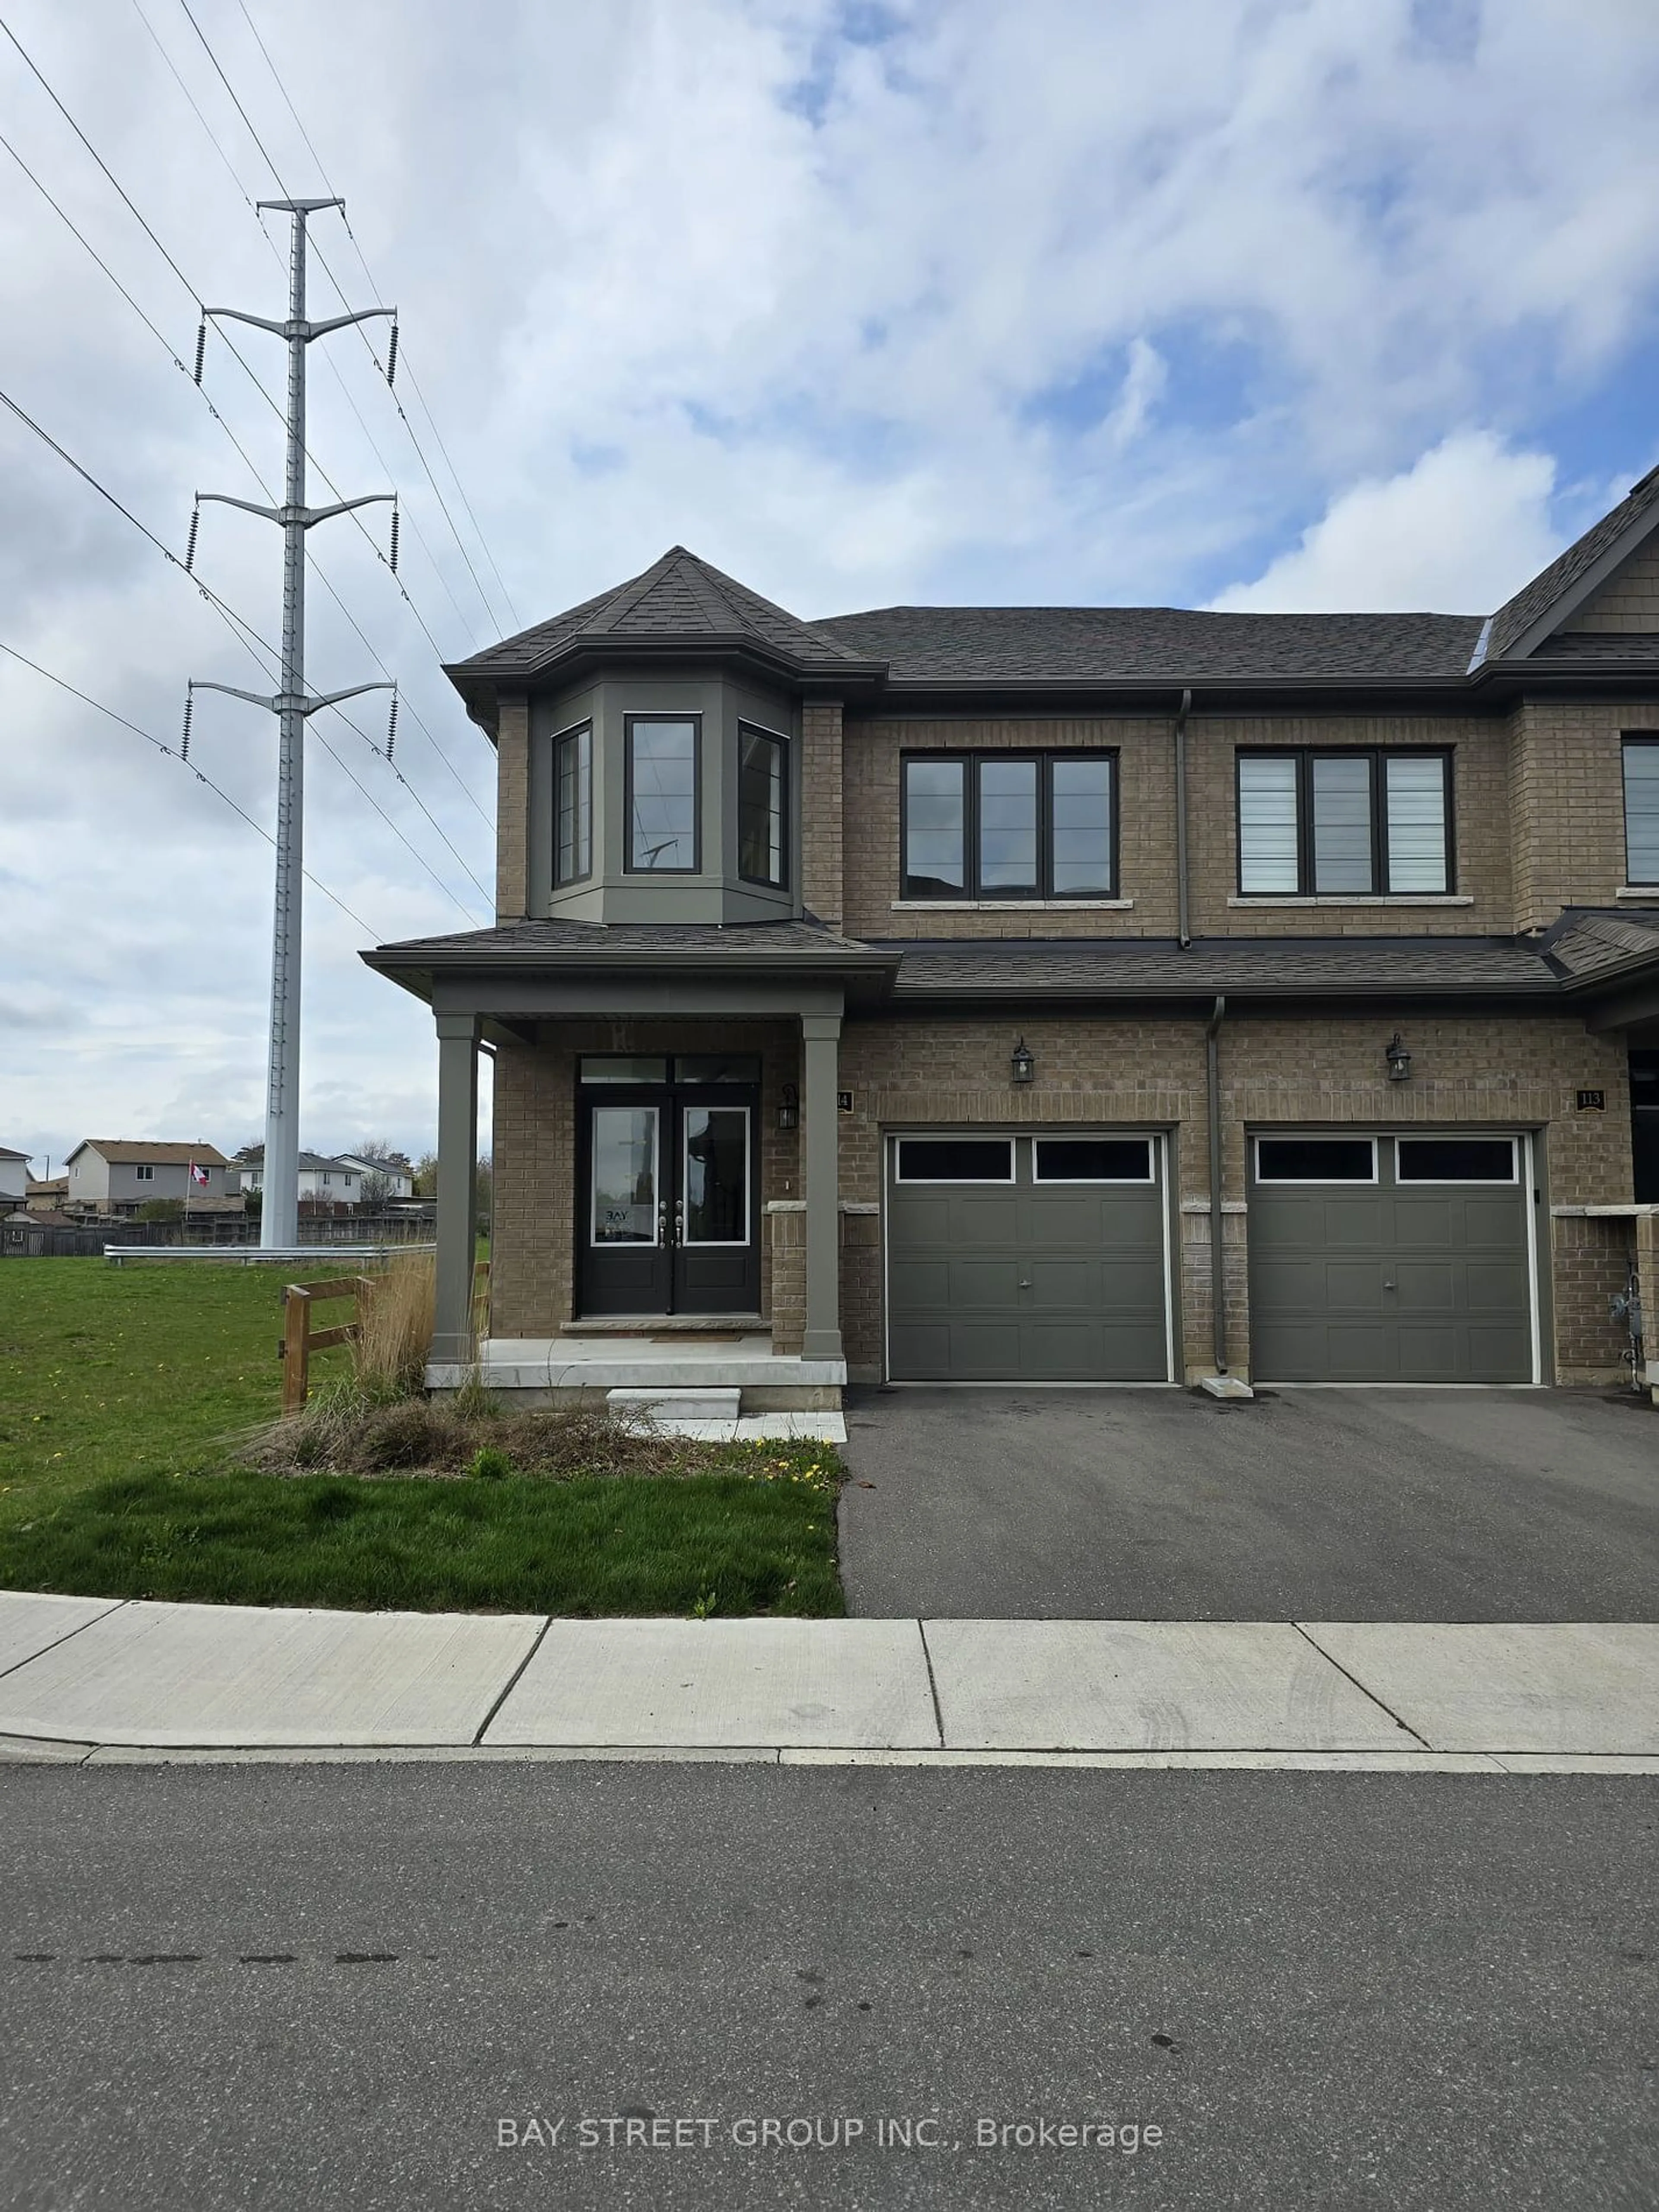 Frontside or backside of a home for 166 Deerpath St #114, Guelph Ontario N1K 1W6